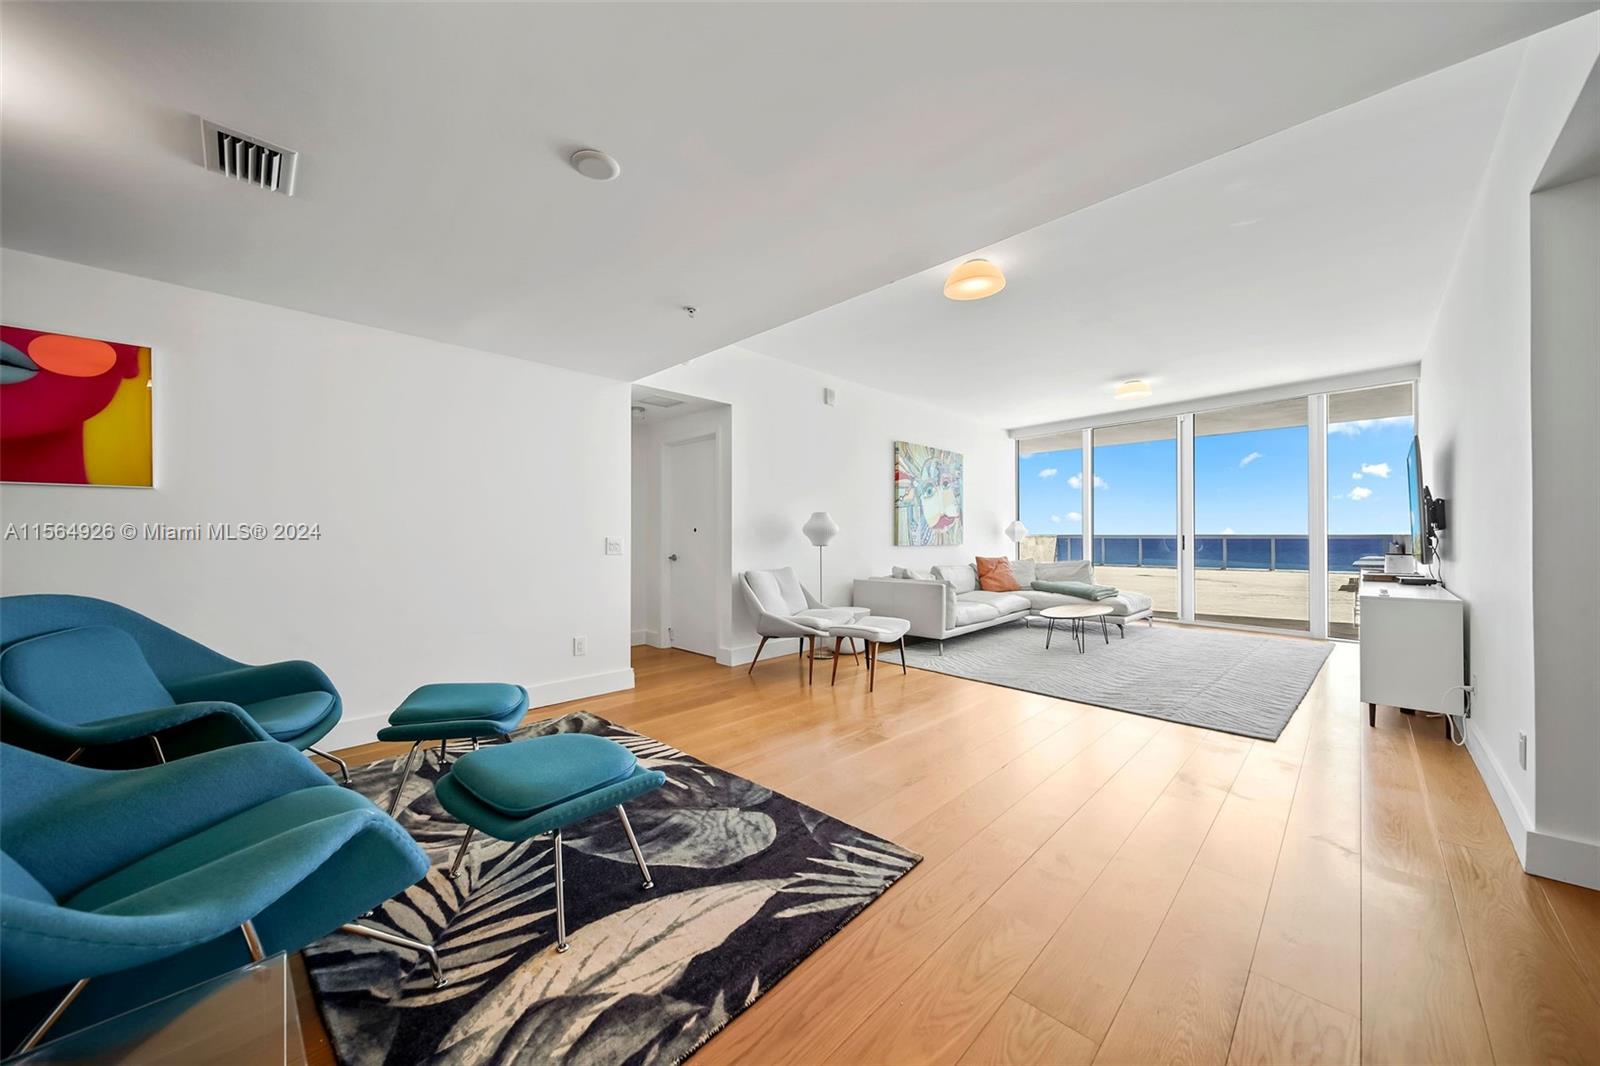 Listing Image 6899 Collins Ave #606/607